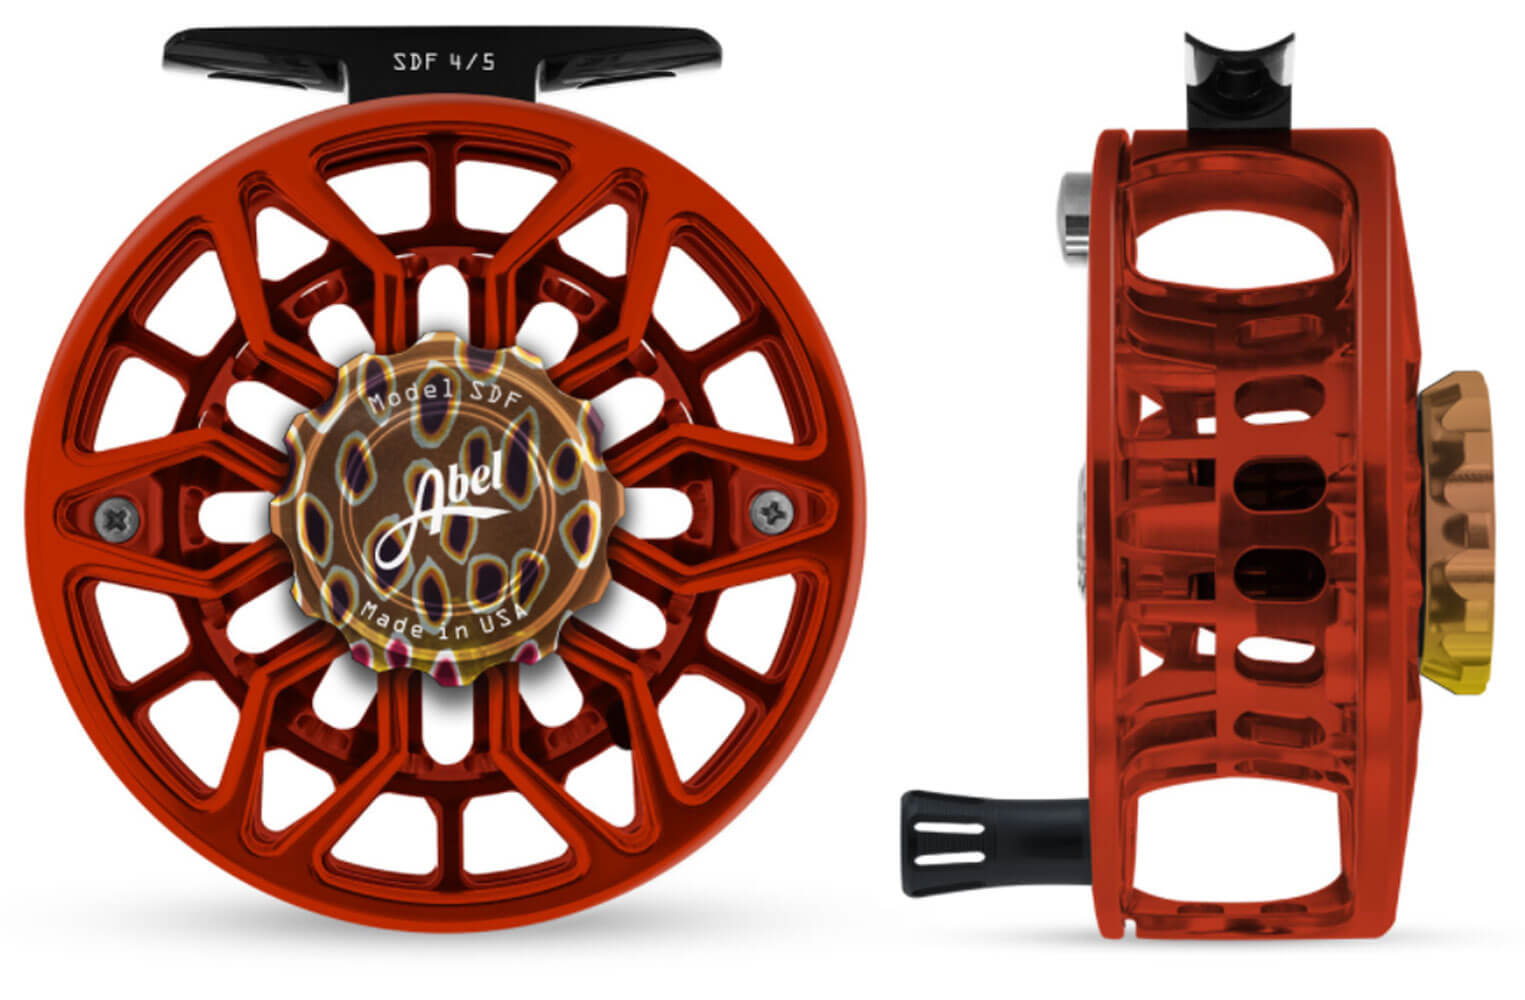 Abel SDF 4/5 reel, Red with Classic Brown knob (IN STOCK)